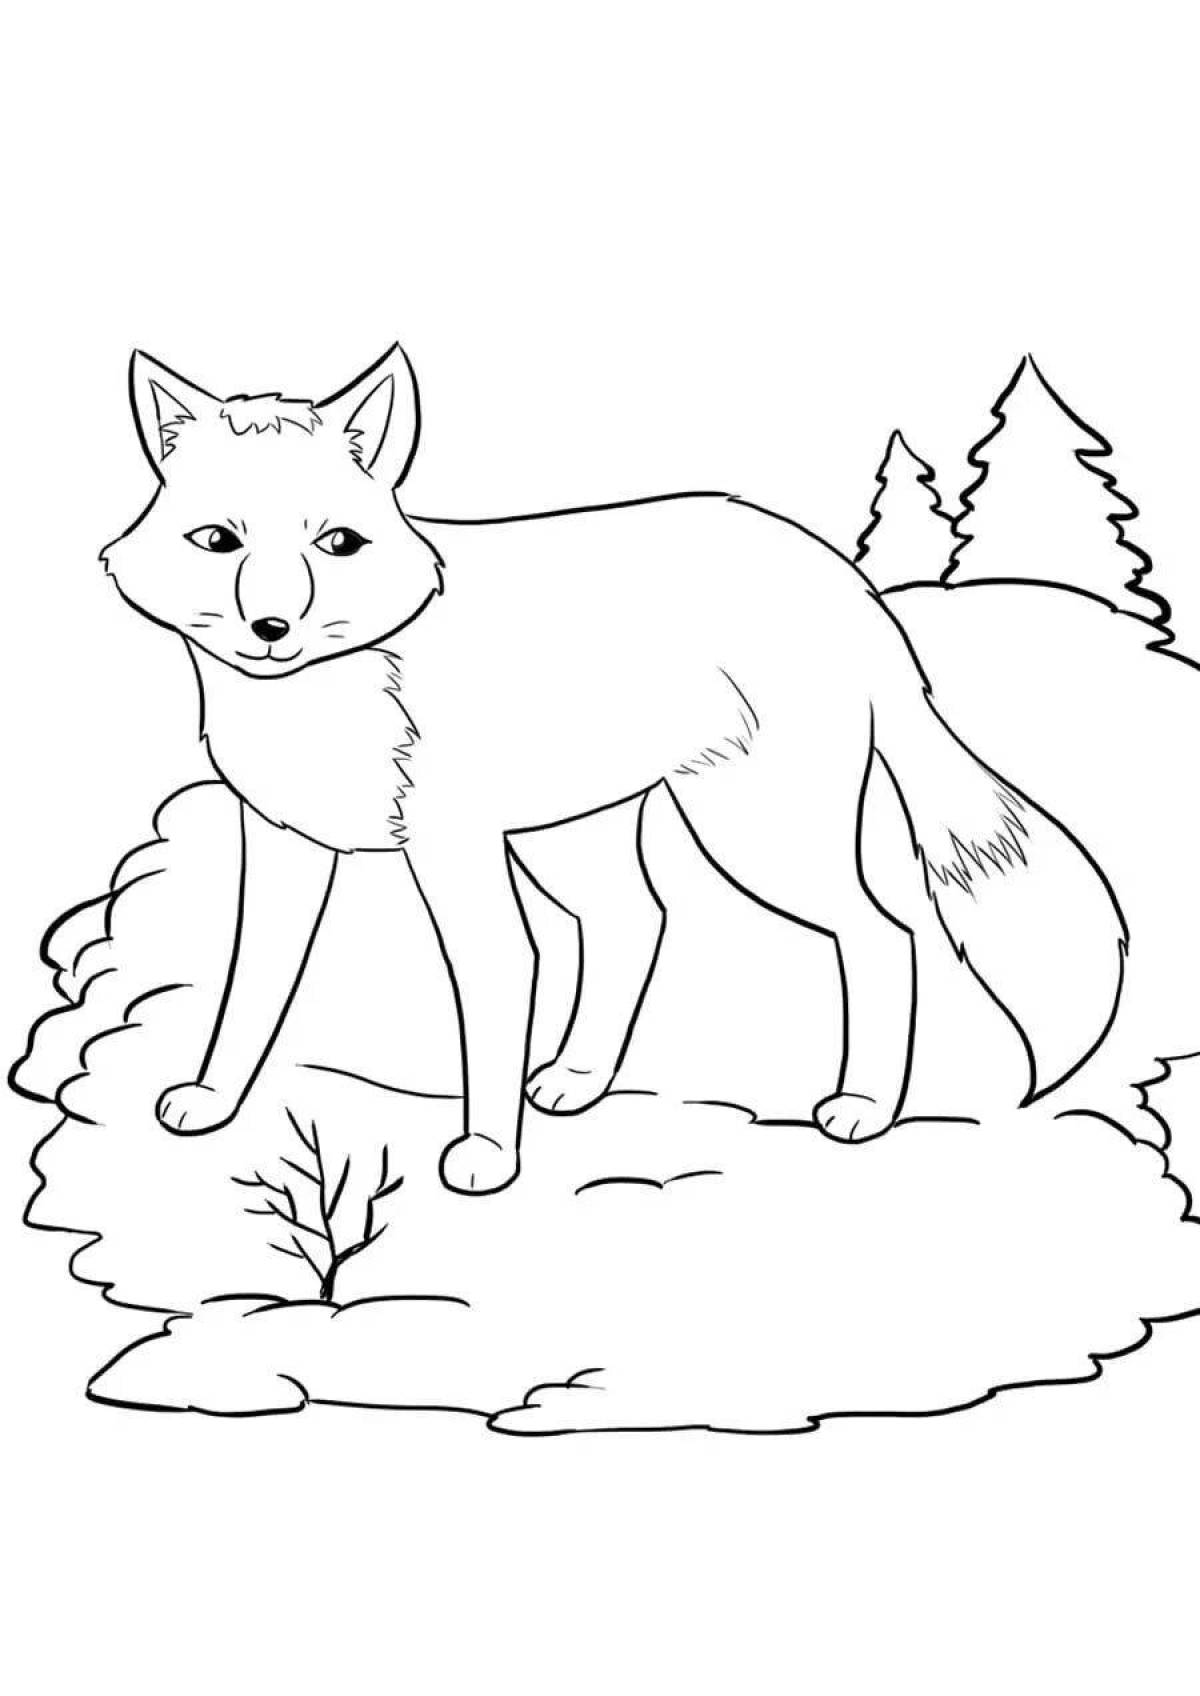 Fun animal coloring pages for kids in winter